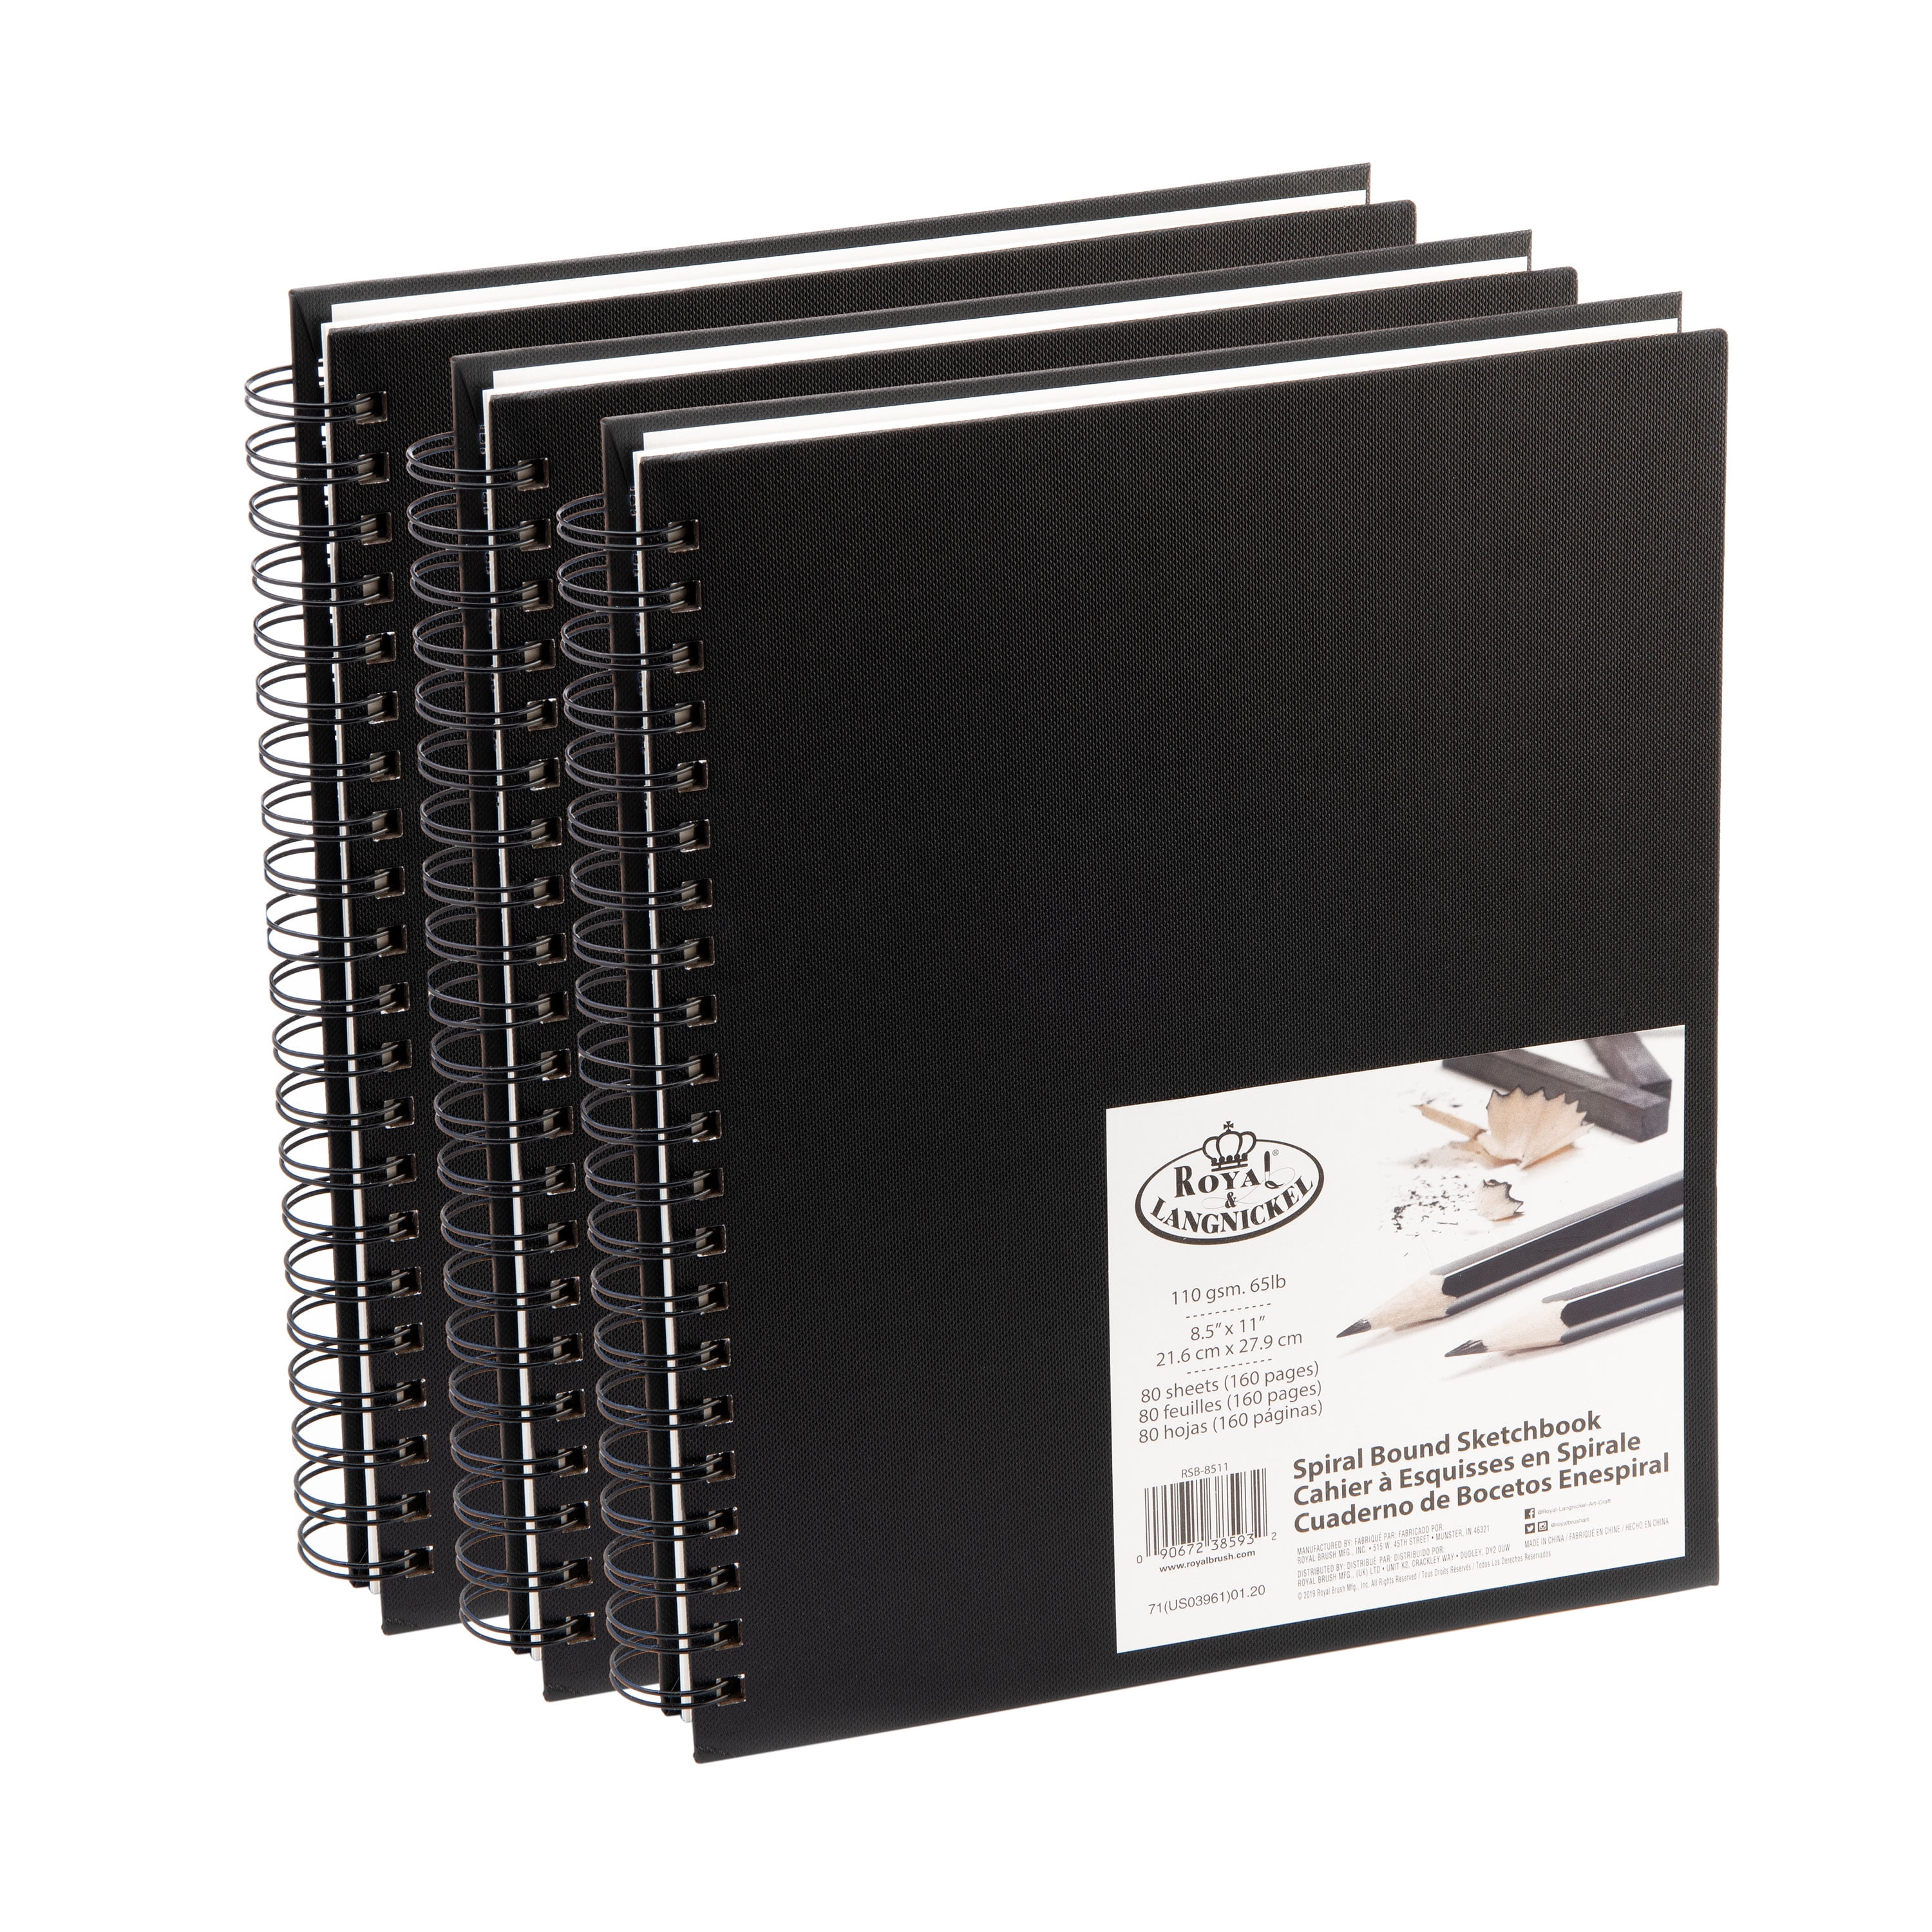 Layflat Sketchbook - 8.27 x 11 Inches - Black Blank Note Book, 64 Sheets, Thick 100gsm Paper, for Drawing, Sketching, and Journaling